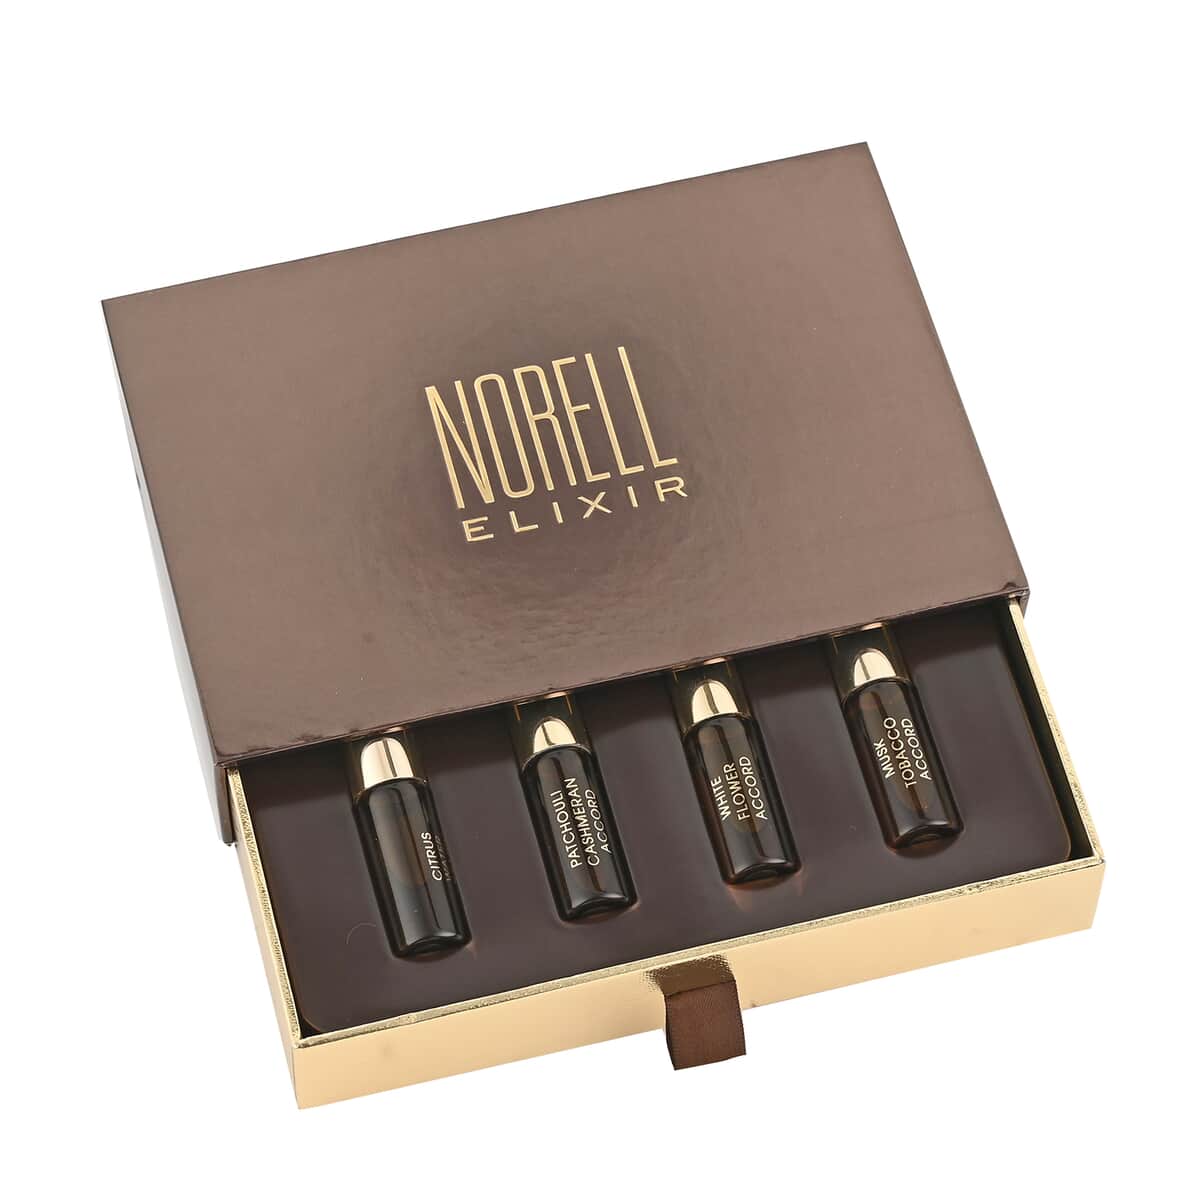 Norell Elixir Accord Gift Set in Citrus Water, Patchouli Cashmeran, White Flower, & Musk Tobacco (0.17oz each) image number 0